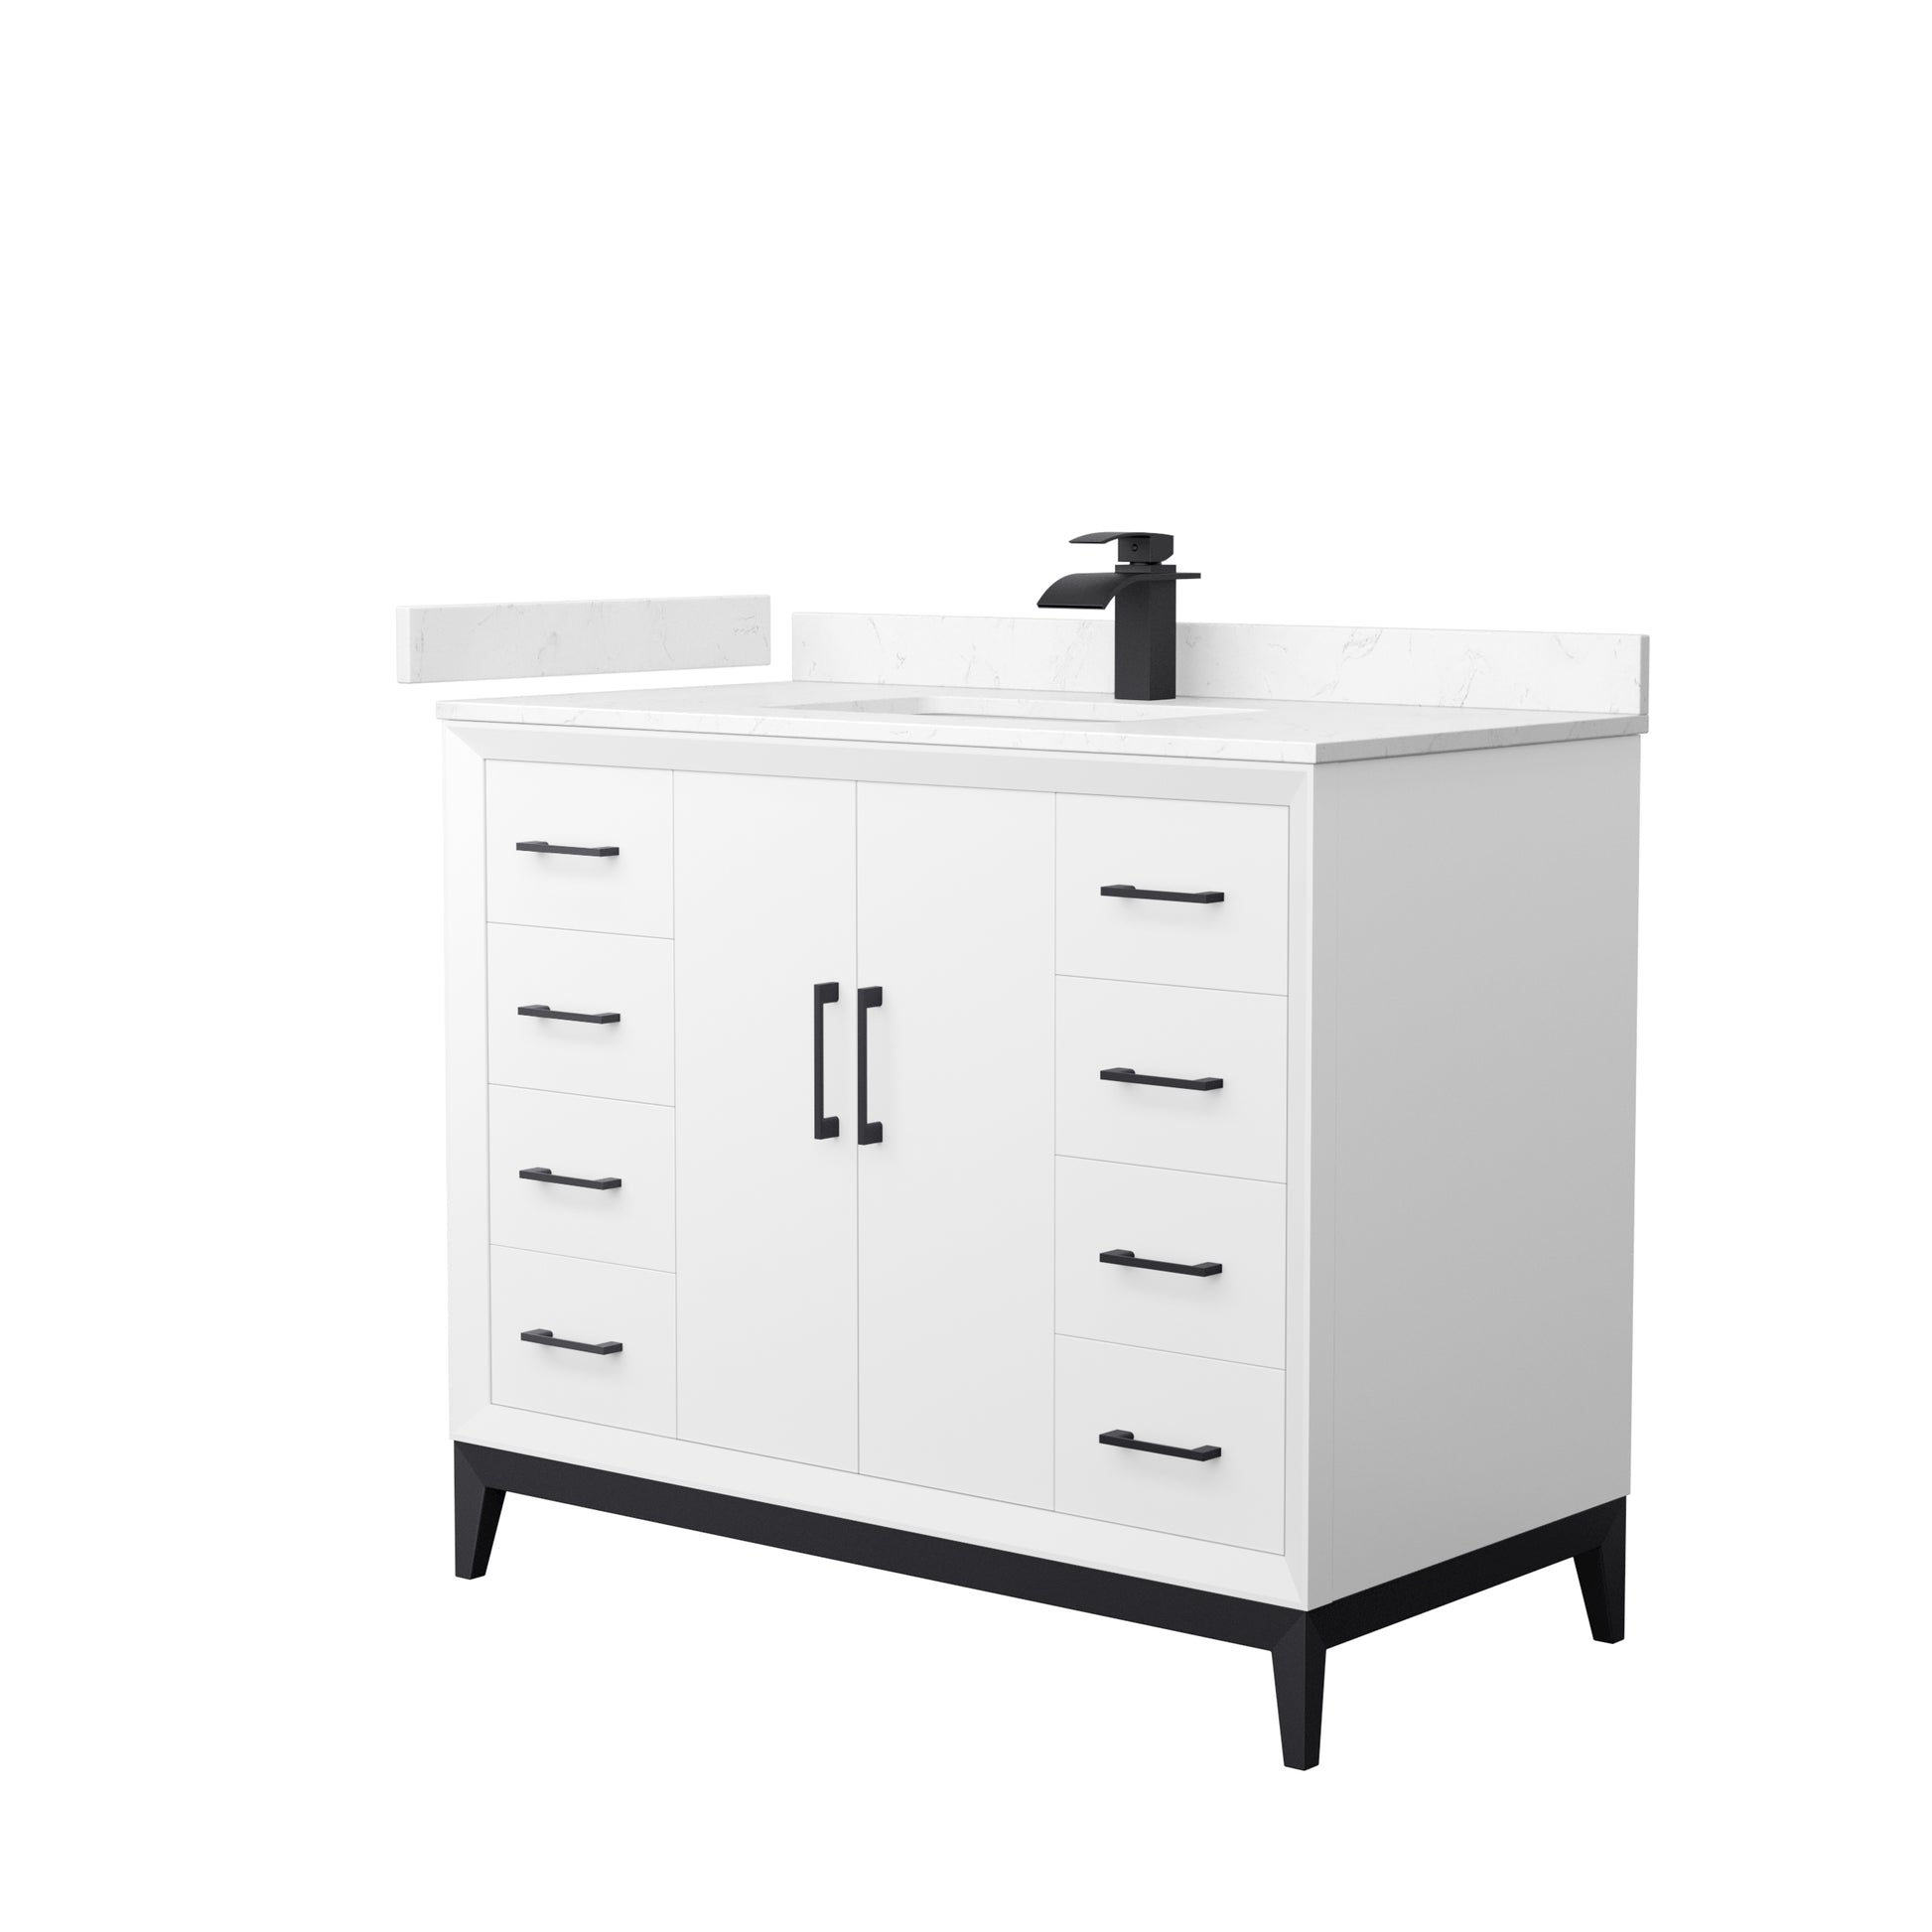 
  
  Amici Single Bathroom Vanity in White, with Cultured Marble, Undermount Square Sink, Optional Trim
  
